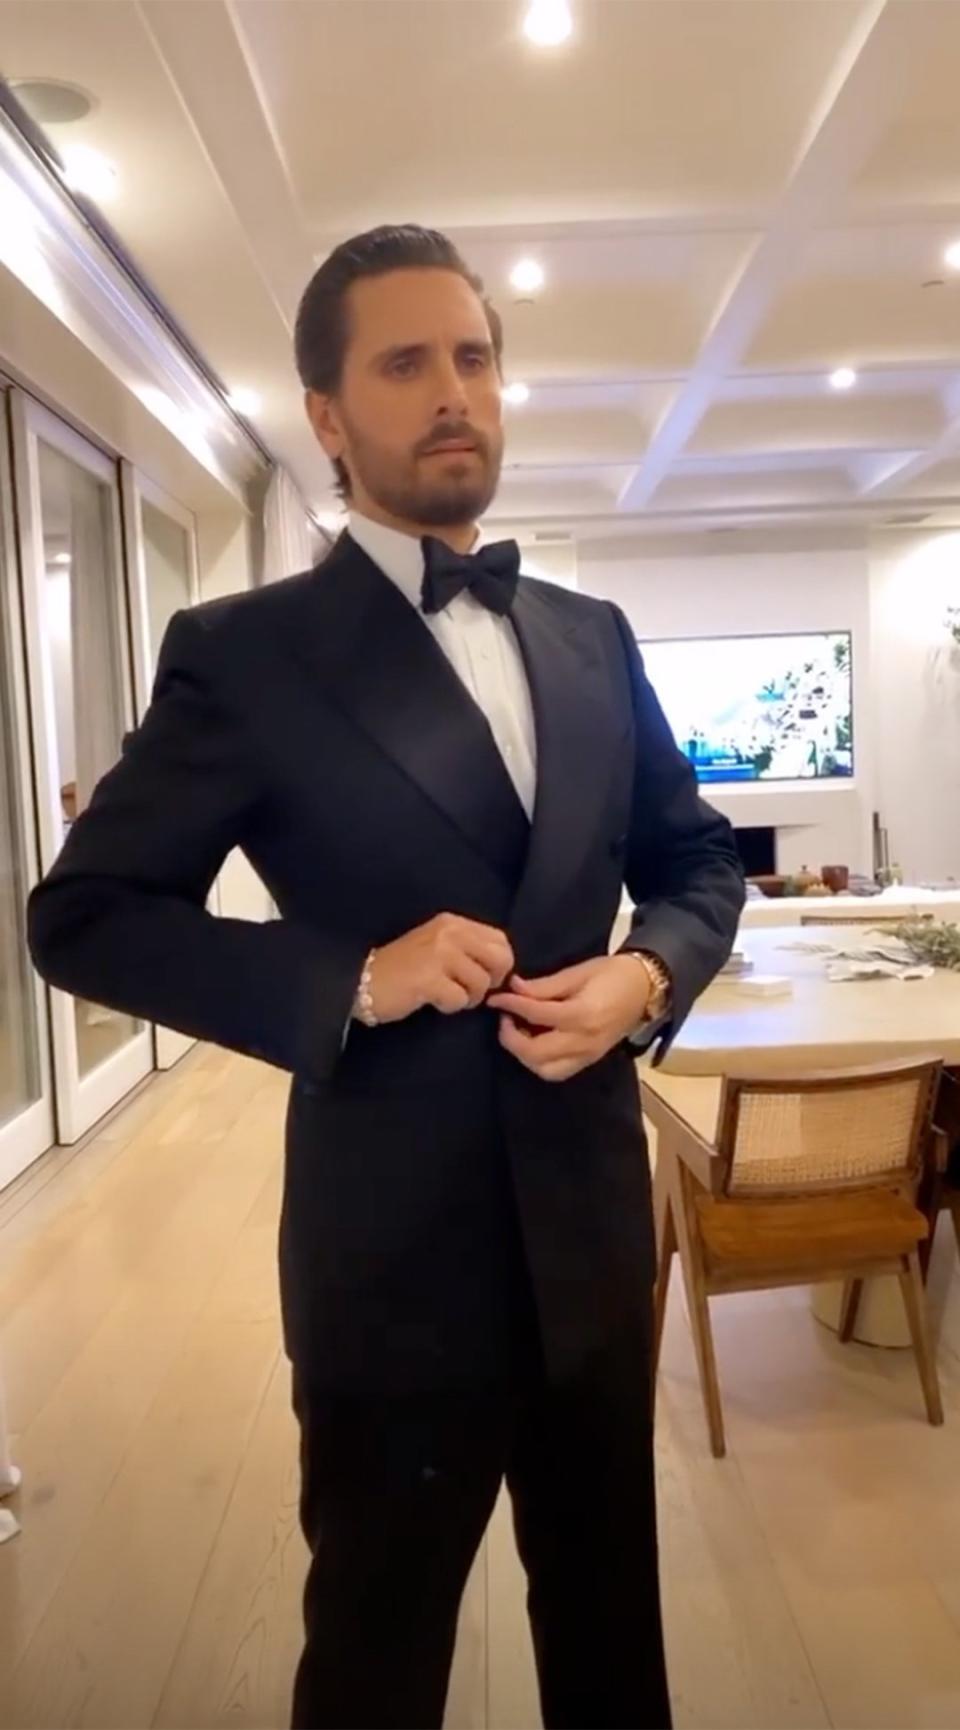 Scott Disick looked dapper for the occasion.